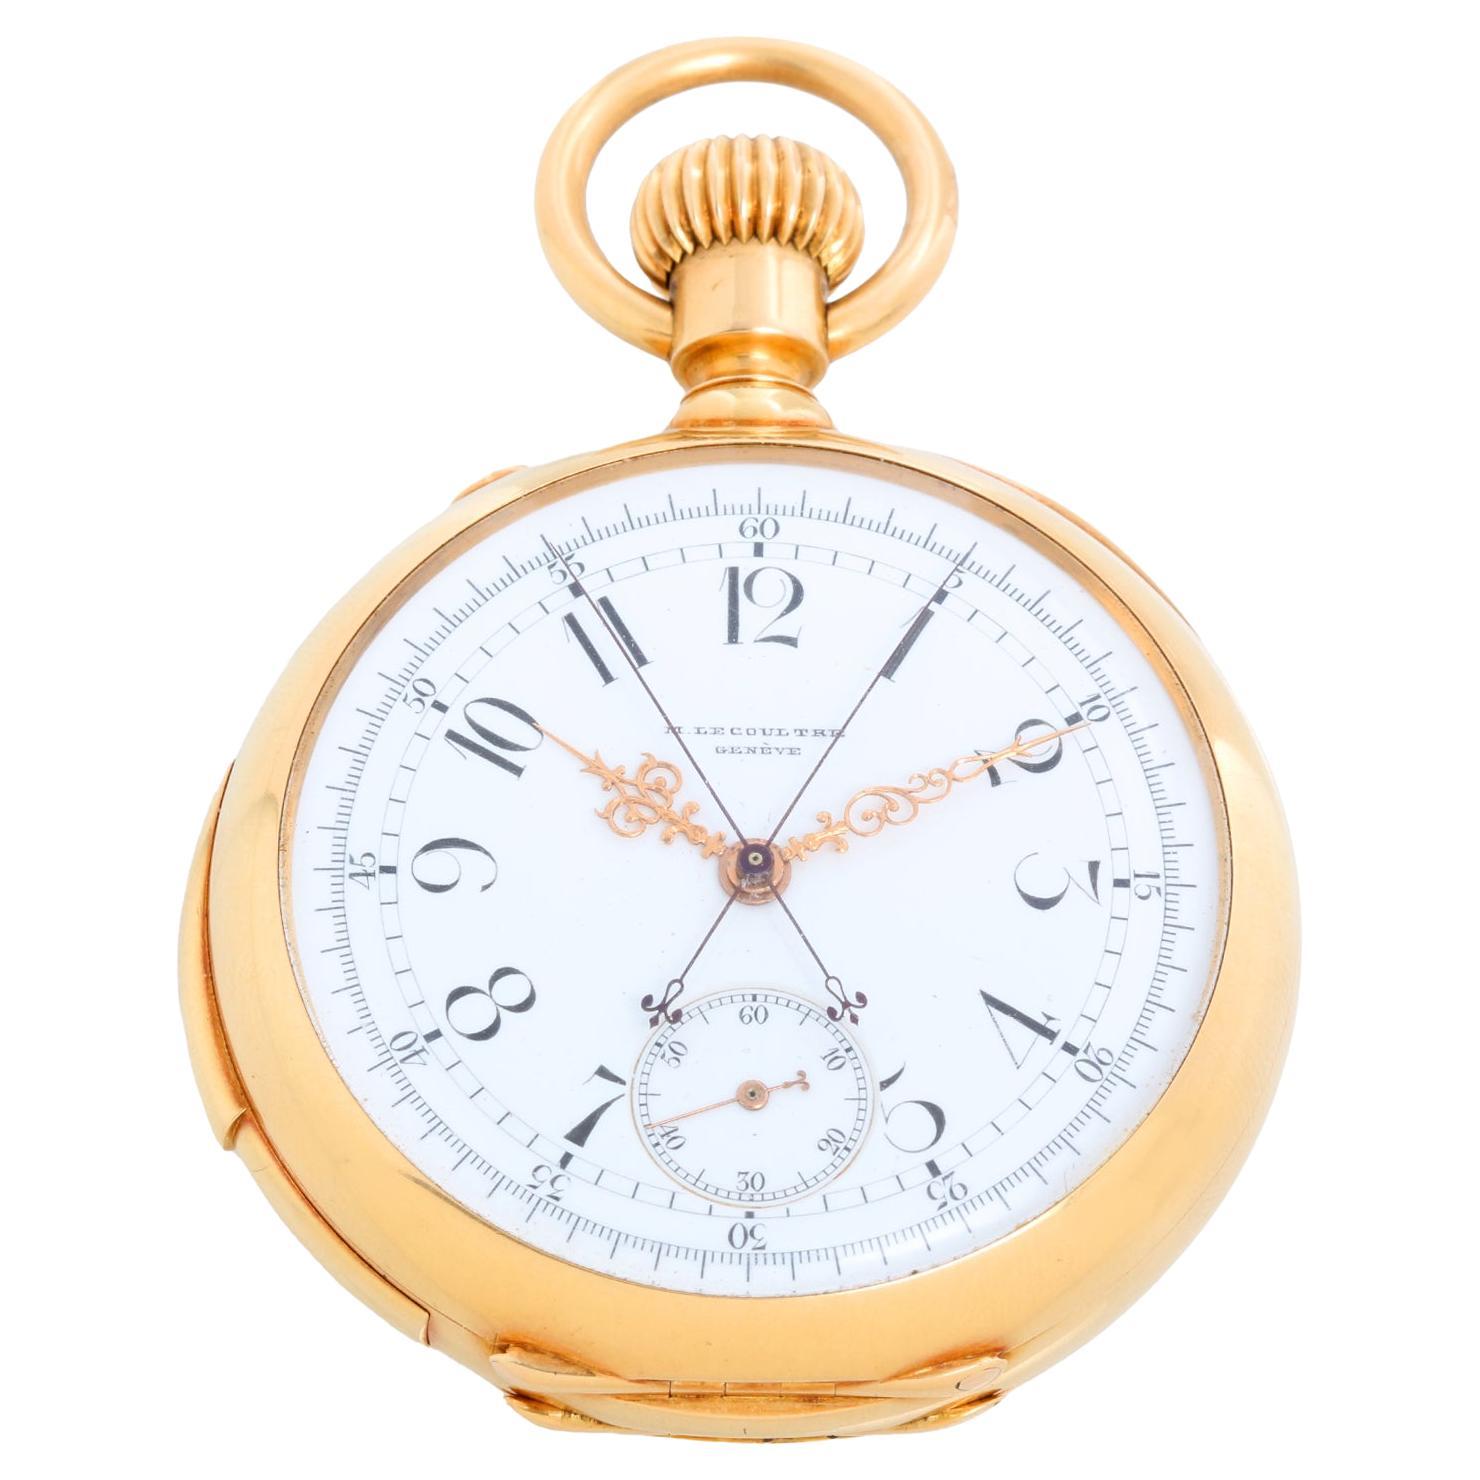 Marius Lecoultre Very Fine Gold Minute Repeater with Split Second Chronograph